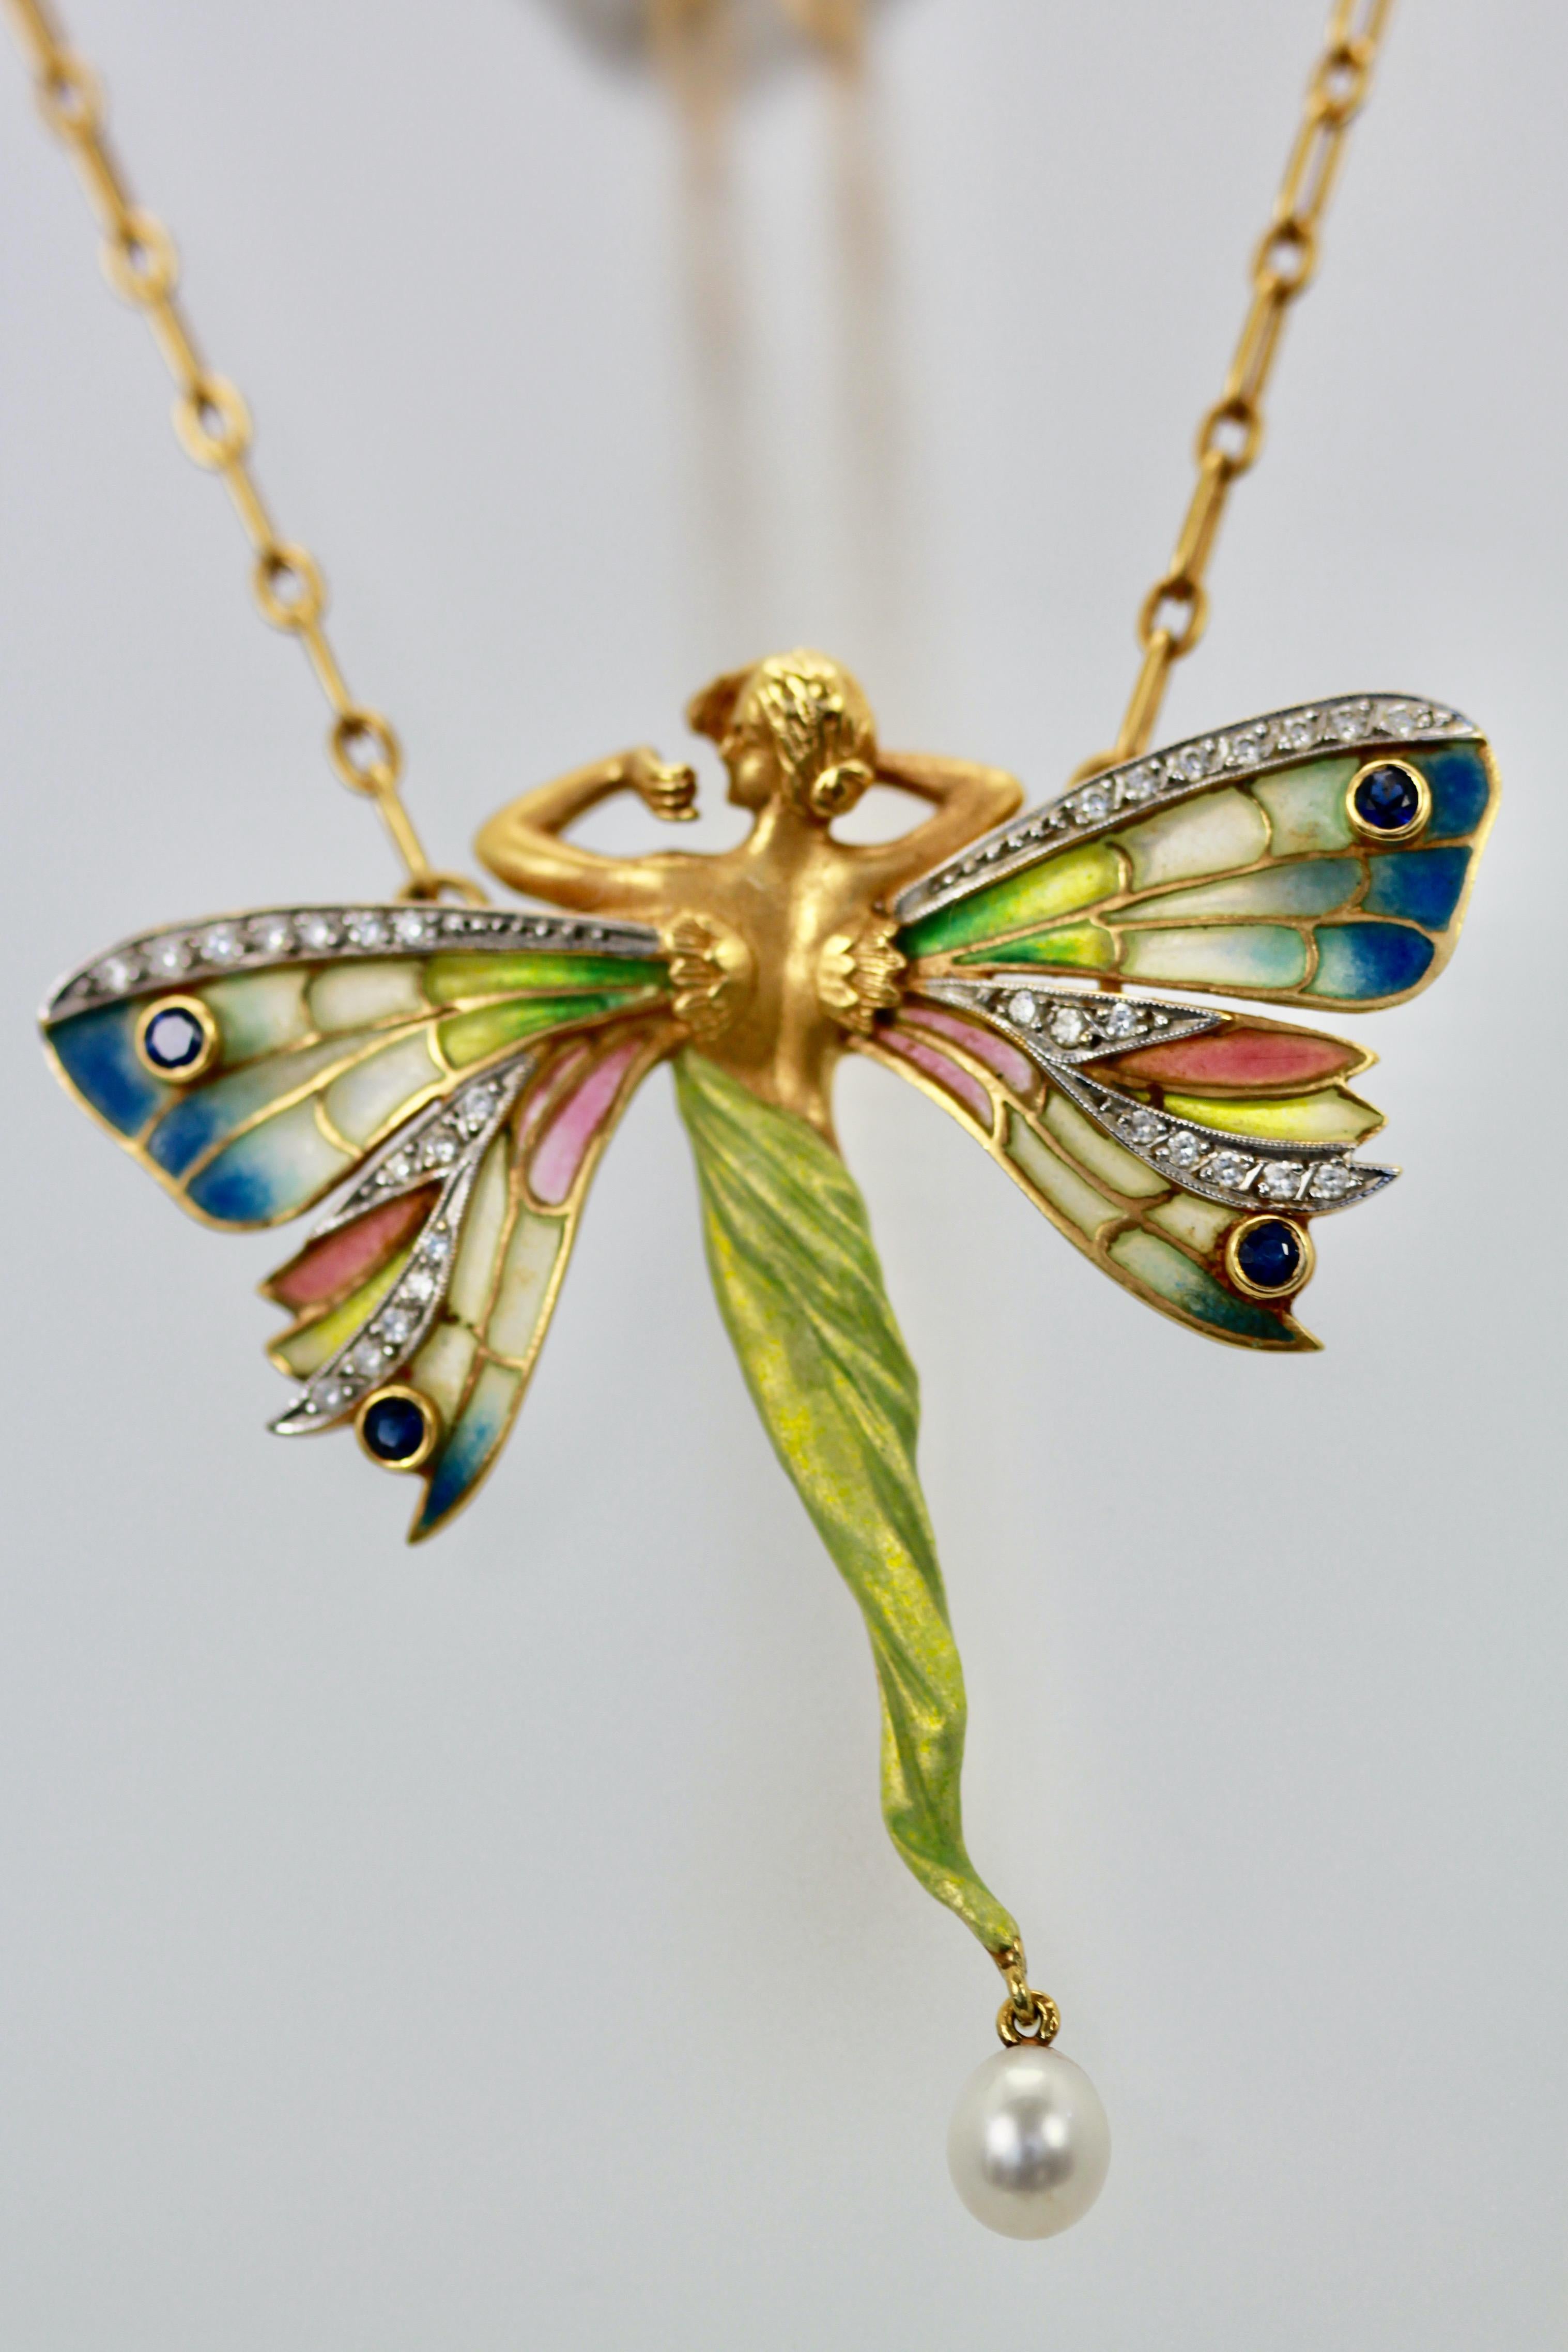 This Masriera piece is very special, it is the most beautiful of all these lady pendants Masriera makes.  The plique a jour wings are enameled in gorgeous shades of Blues and Greens with a little pink and a bit of Yellow.  The wings have Diamonds